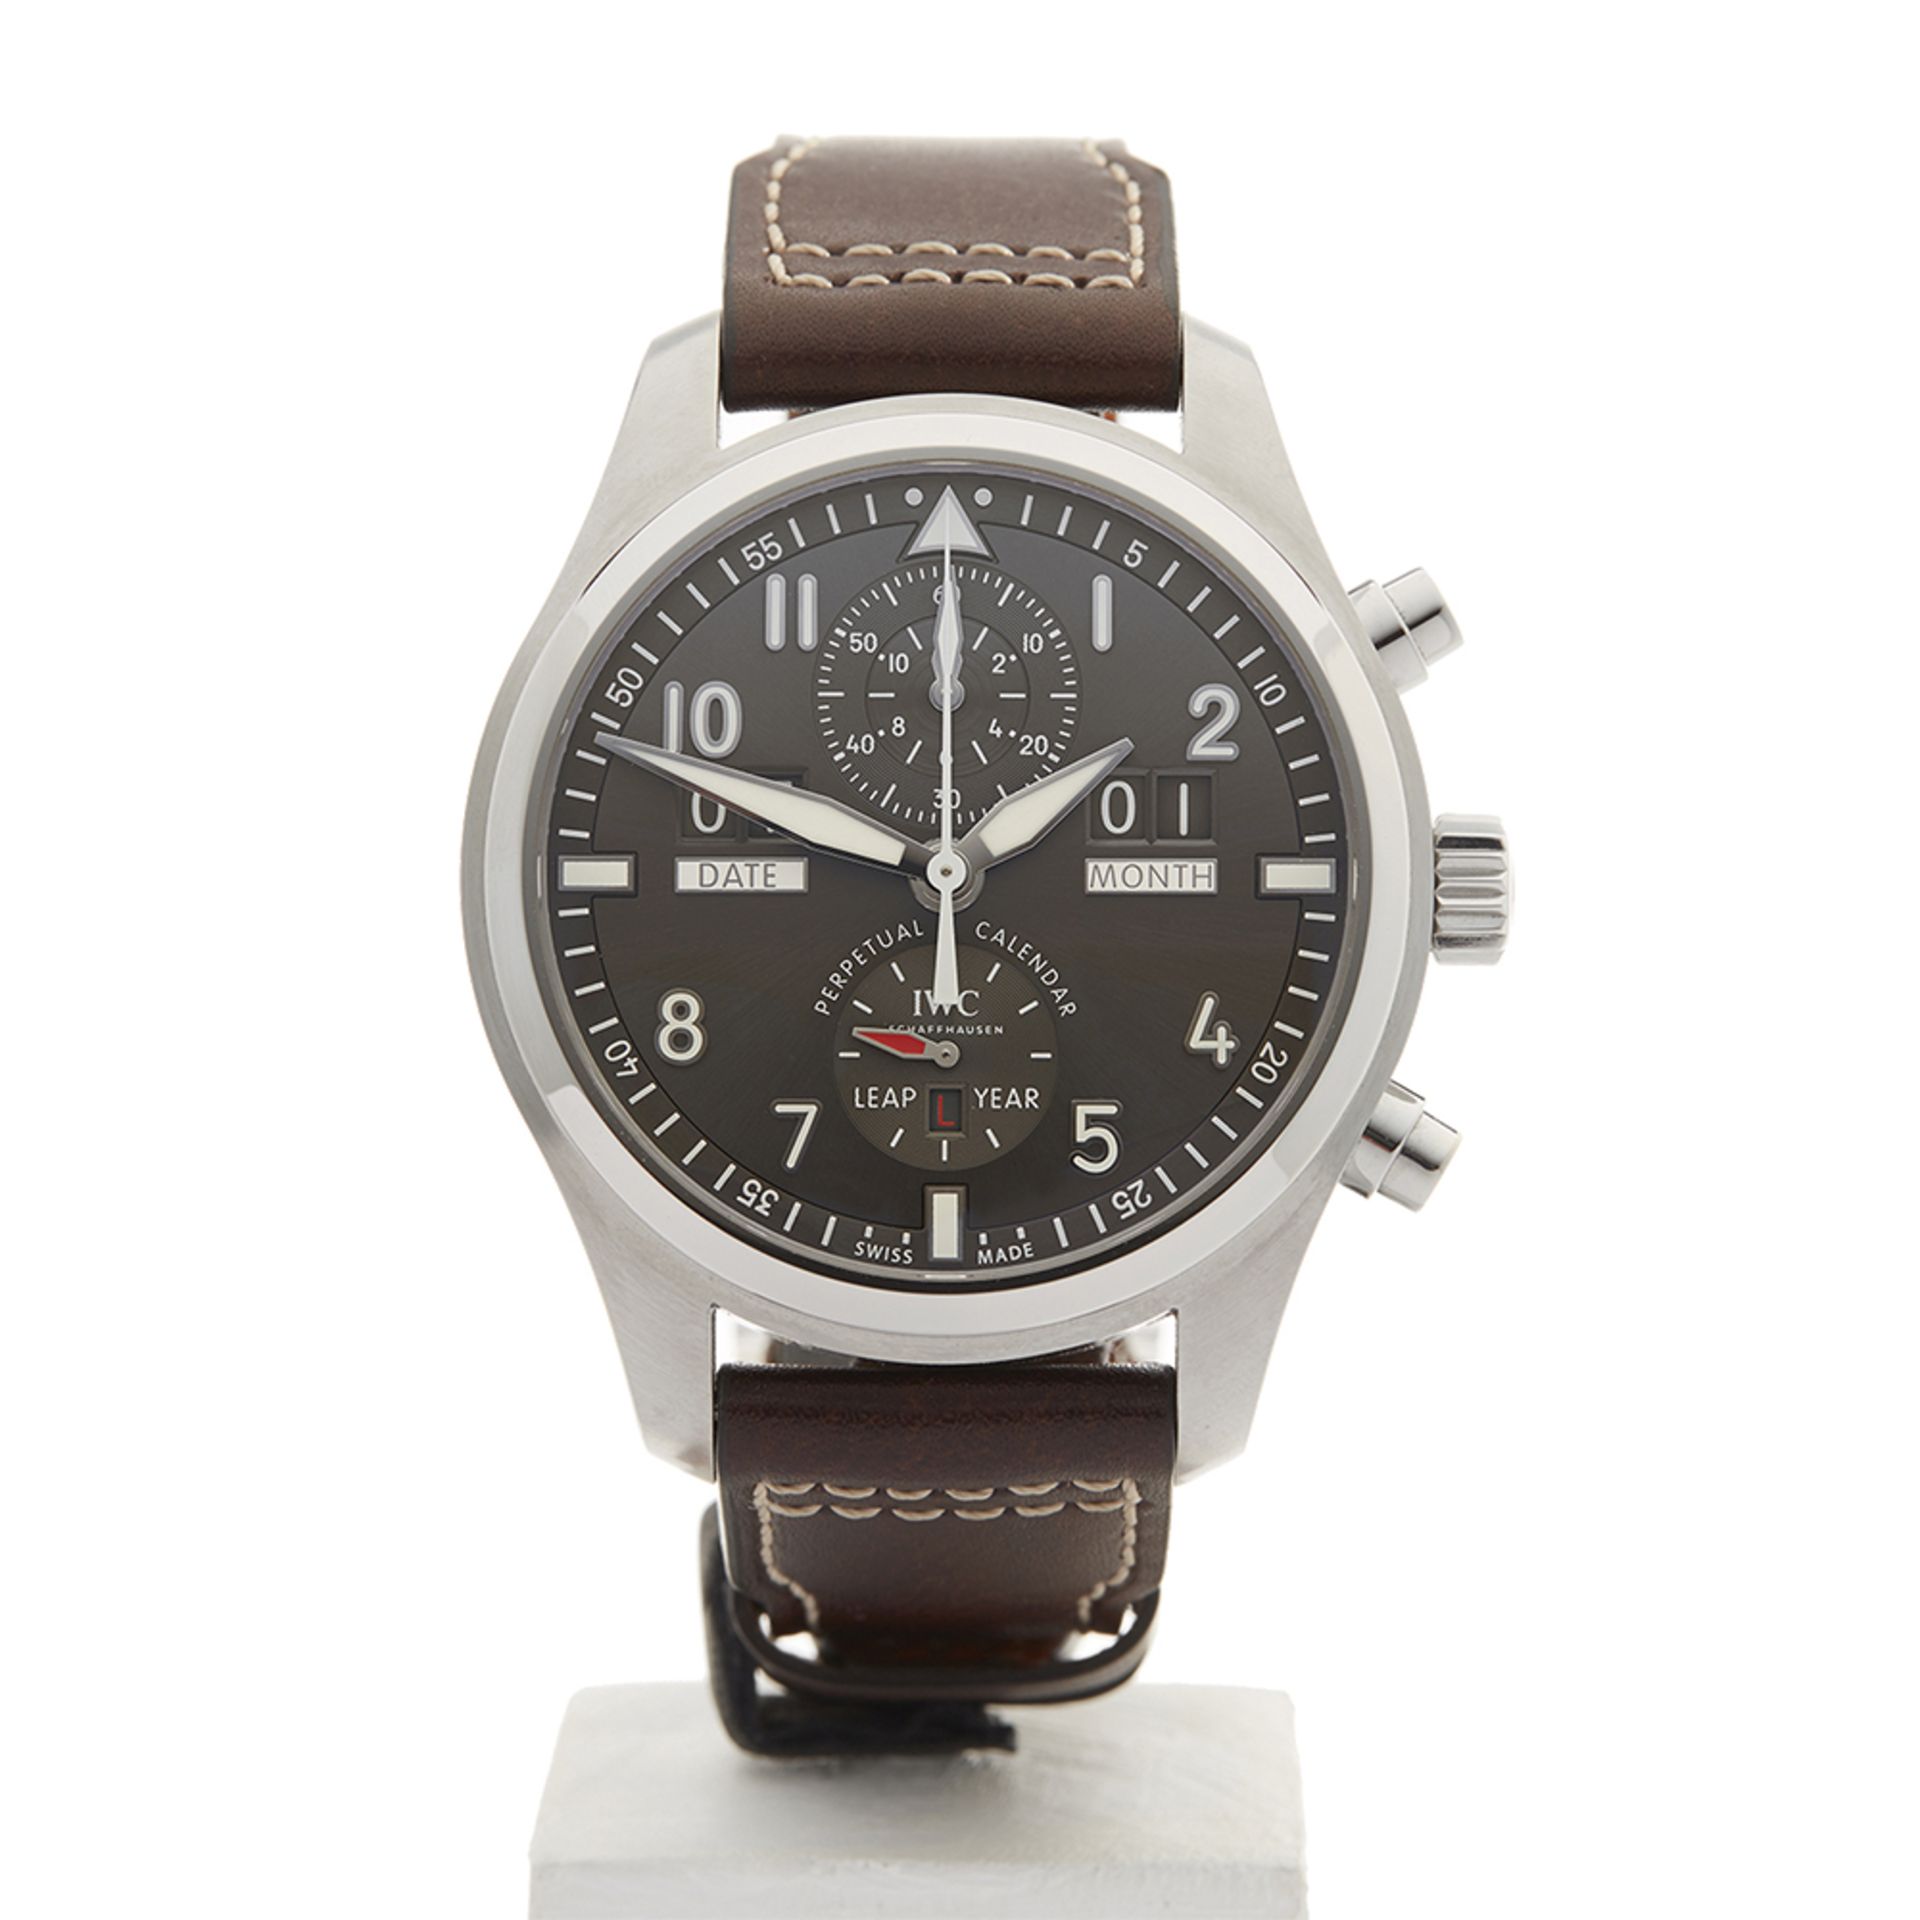 IWC Pilot's Perpetual Calendar 46mm Stainless Steel - IW379108 - Image 2 of 9